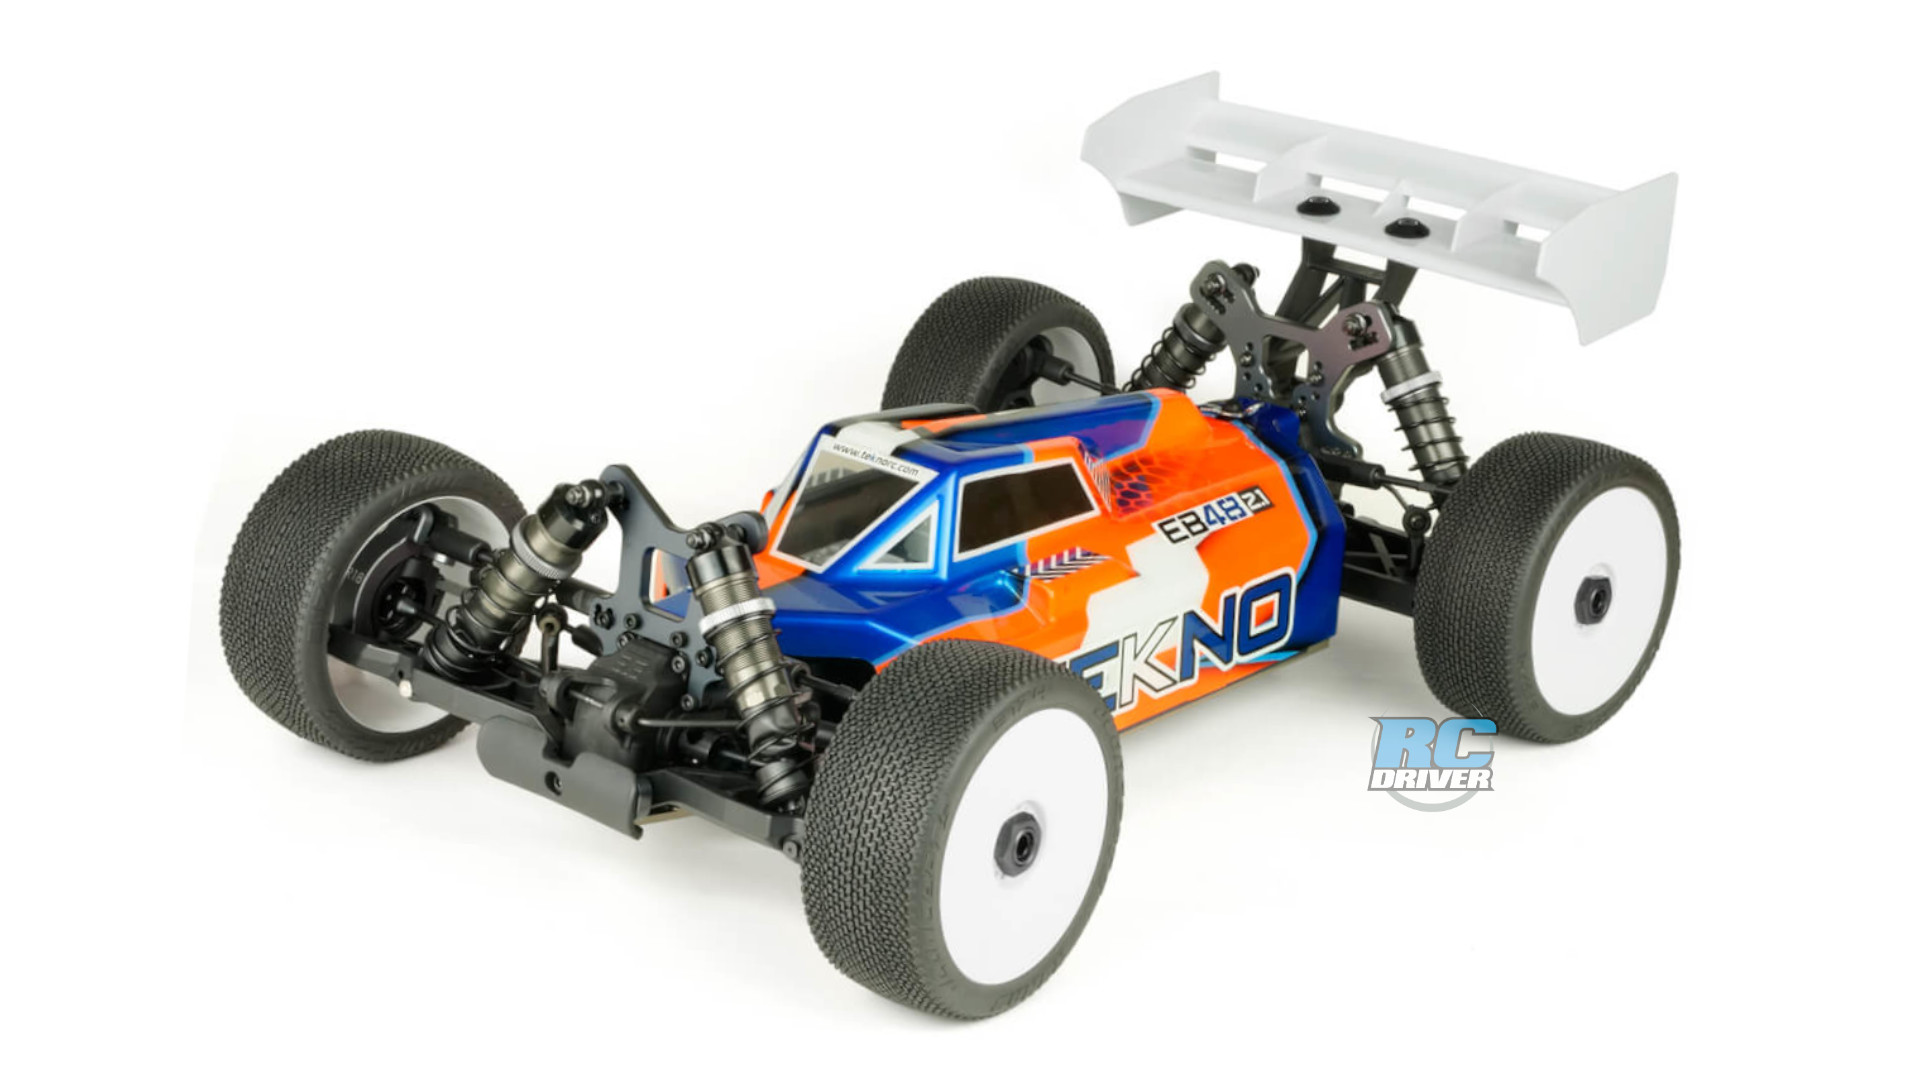 Tekno RC EB48 2.1 Competition Electric 1/8 4WD Buggy Kit